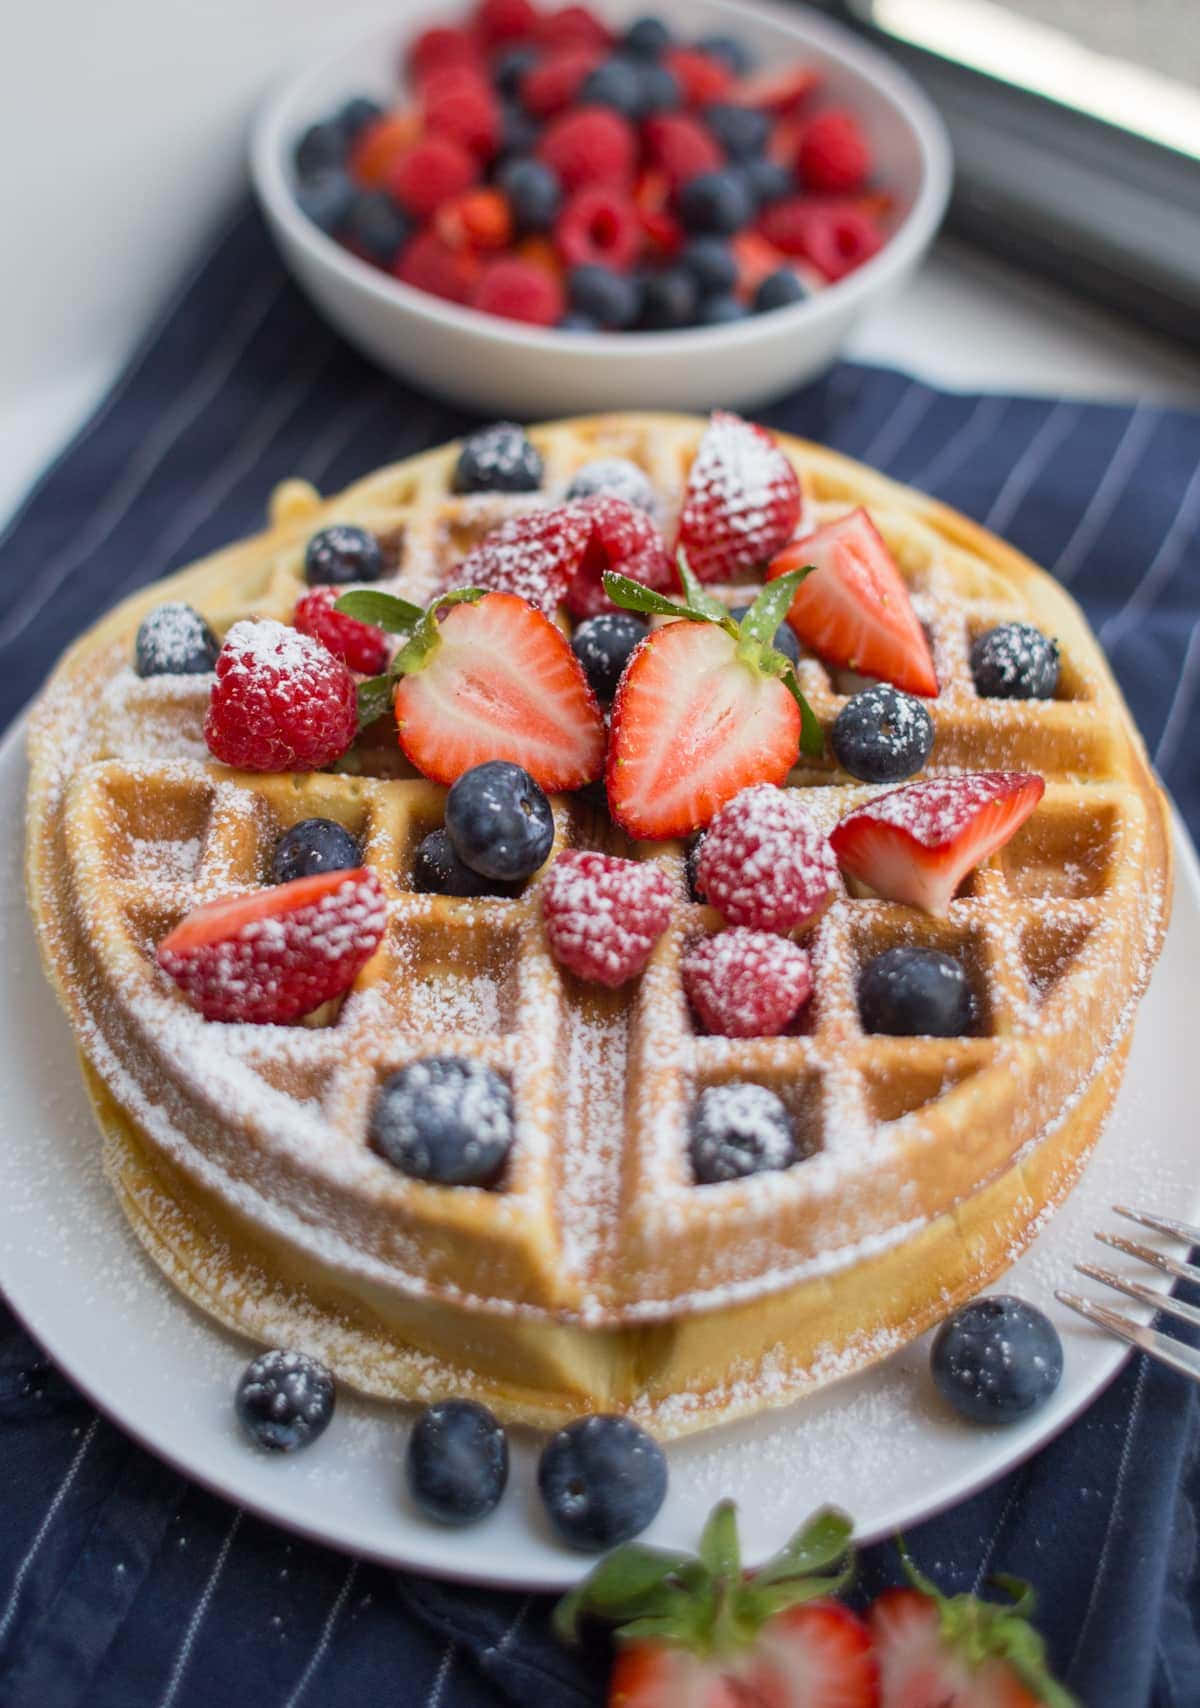 Enjoy the warm and deliciousness of a classic waffle